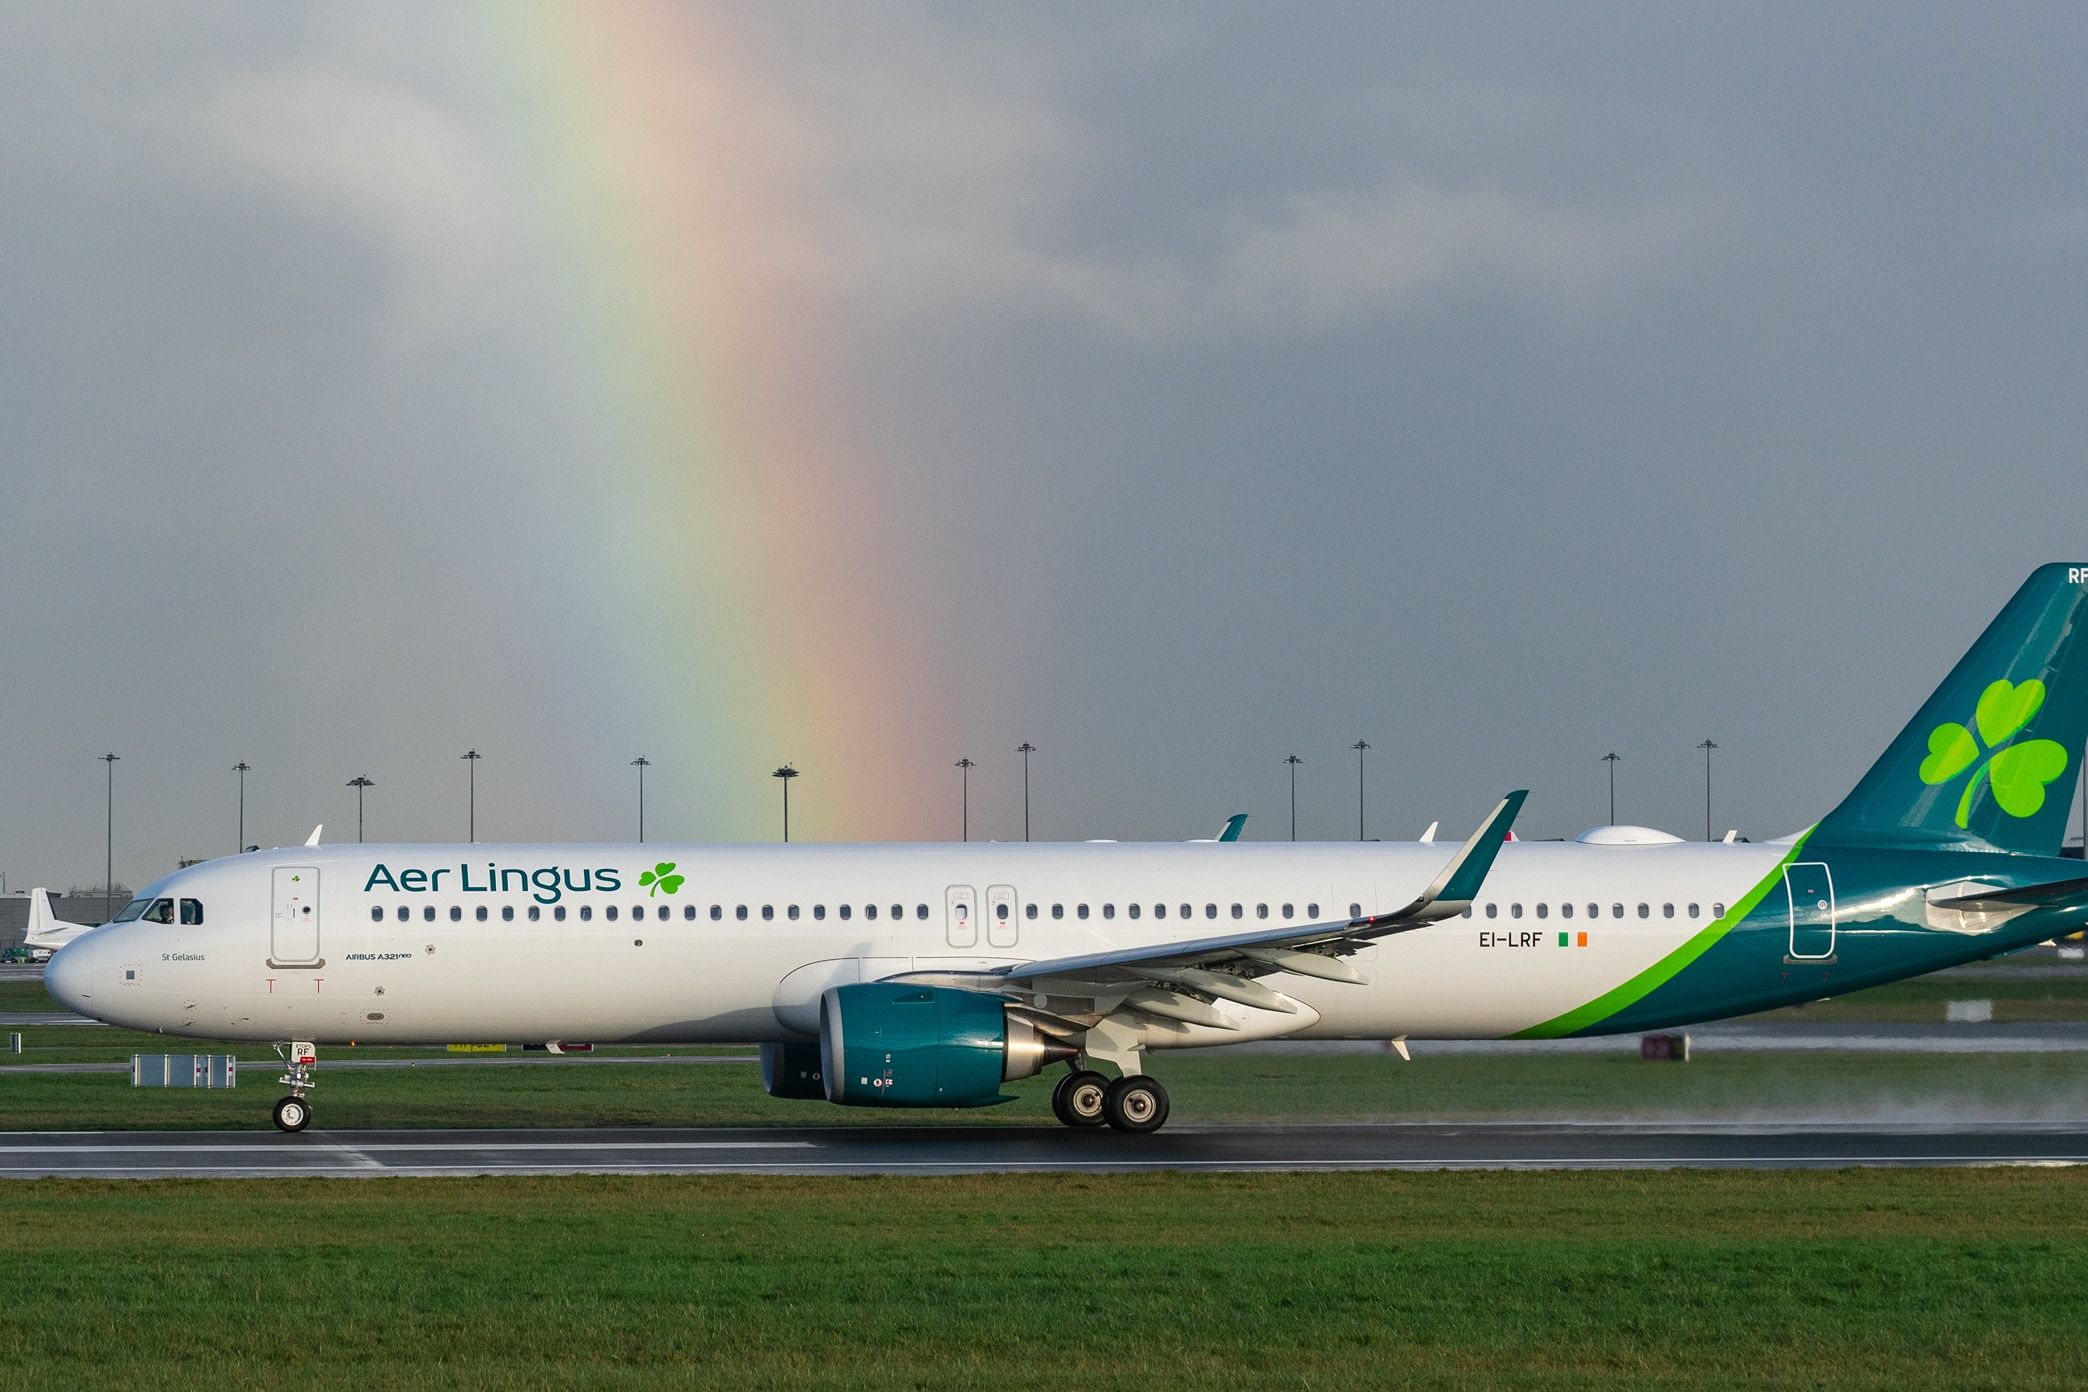 Aer Lingus Airbus A321neo departing